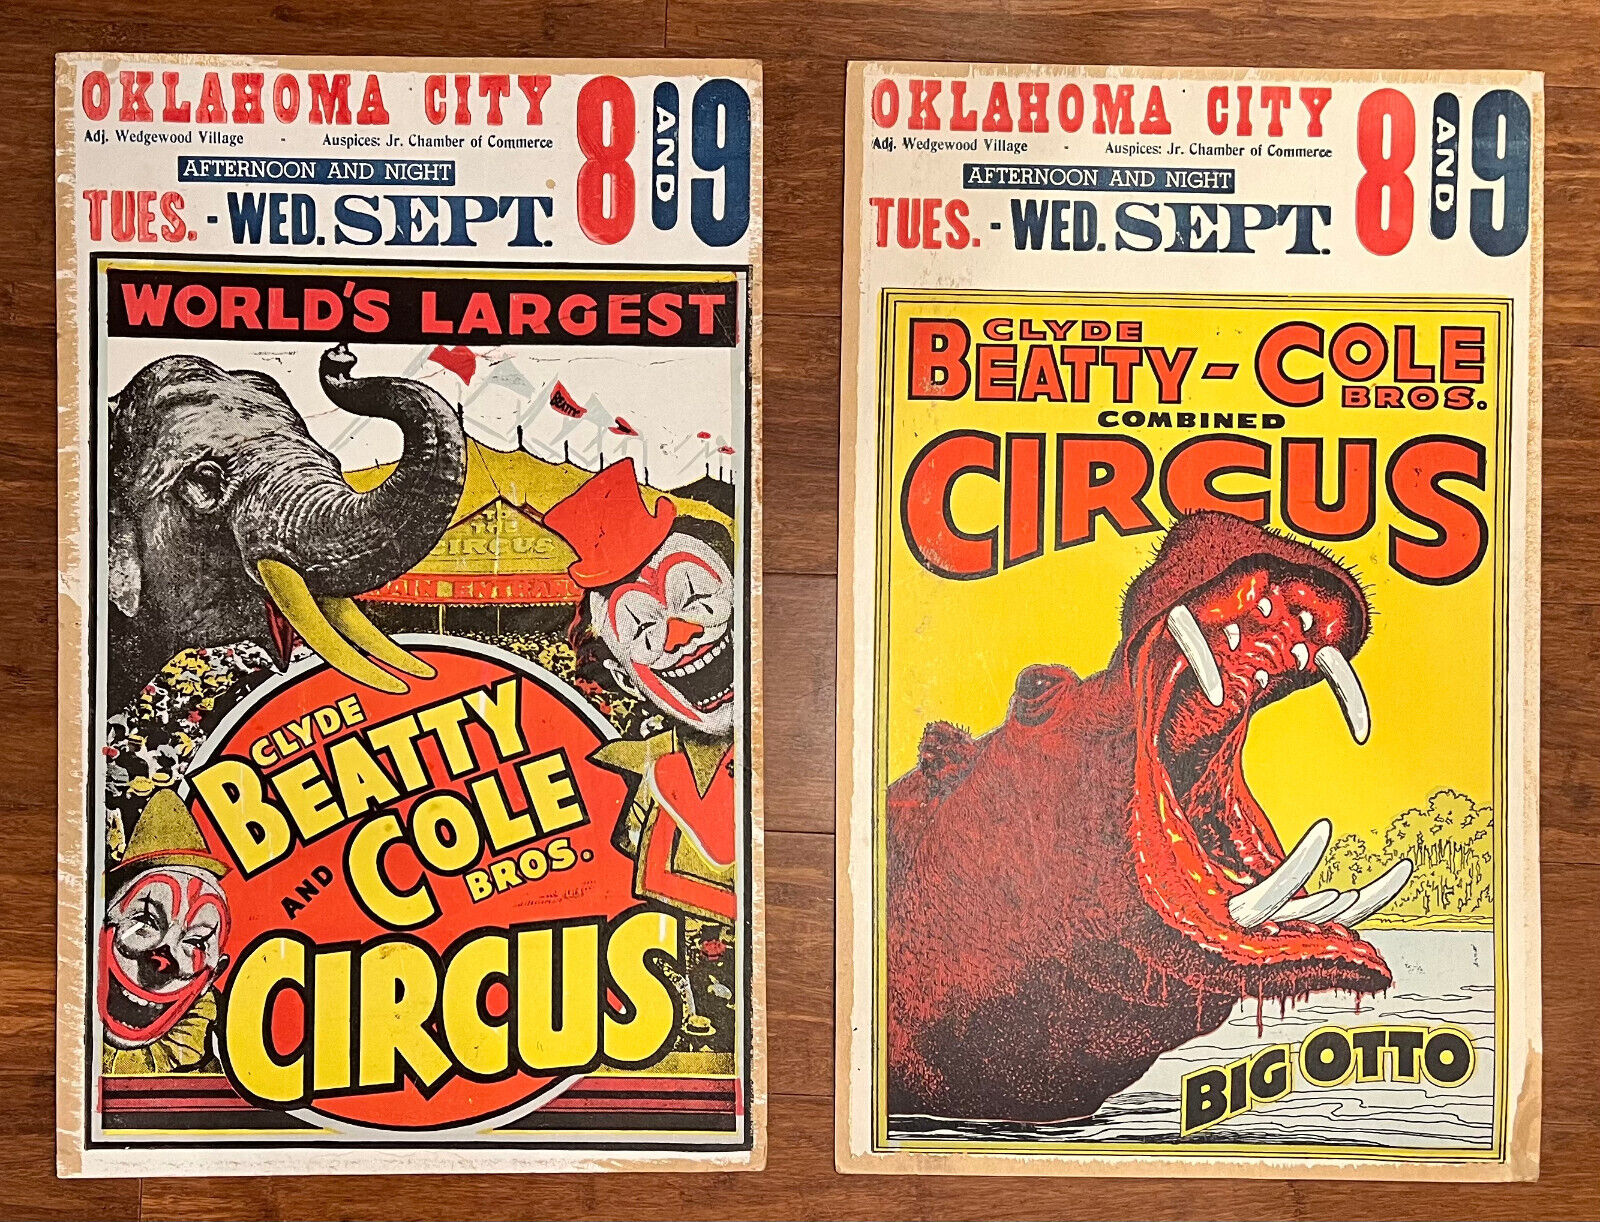 PAIR OF Vintage 1960\'s Clyde Beatty-Cole Bros. Circus Posters OKC 14\